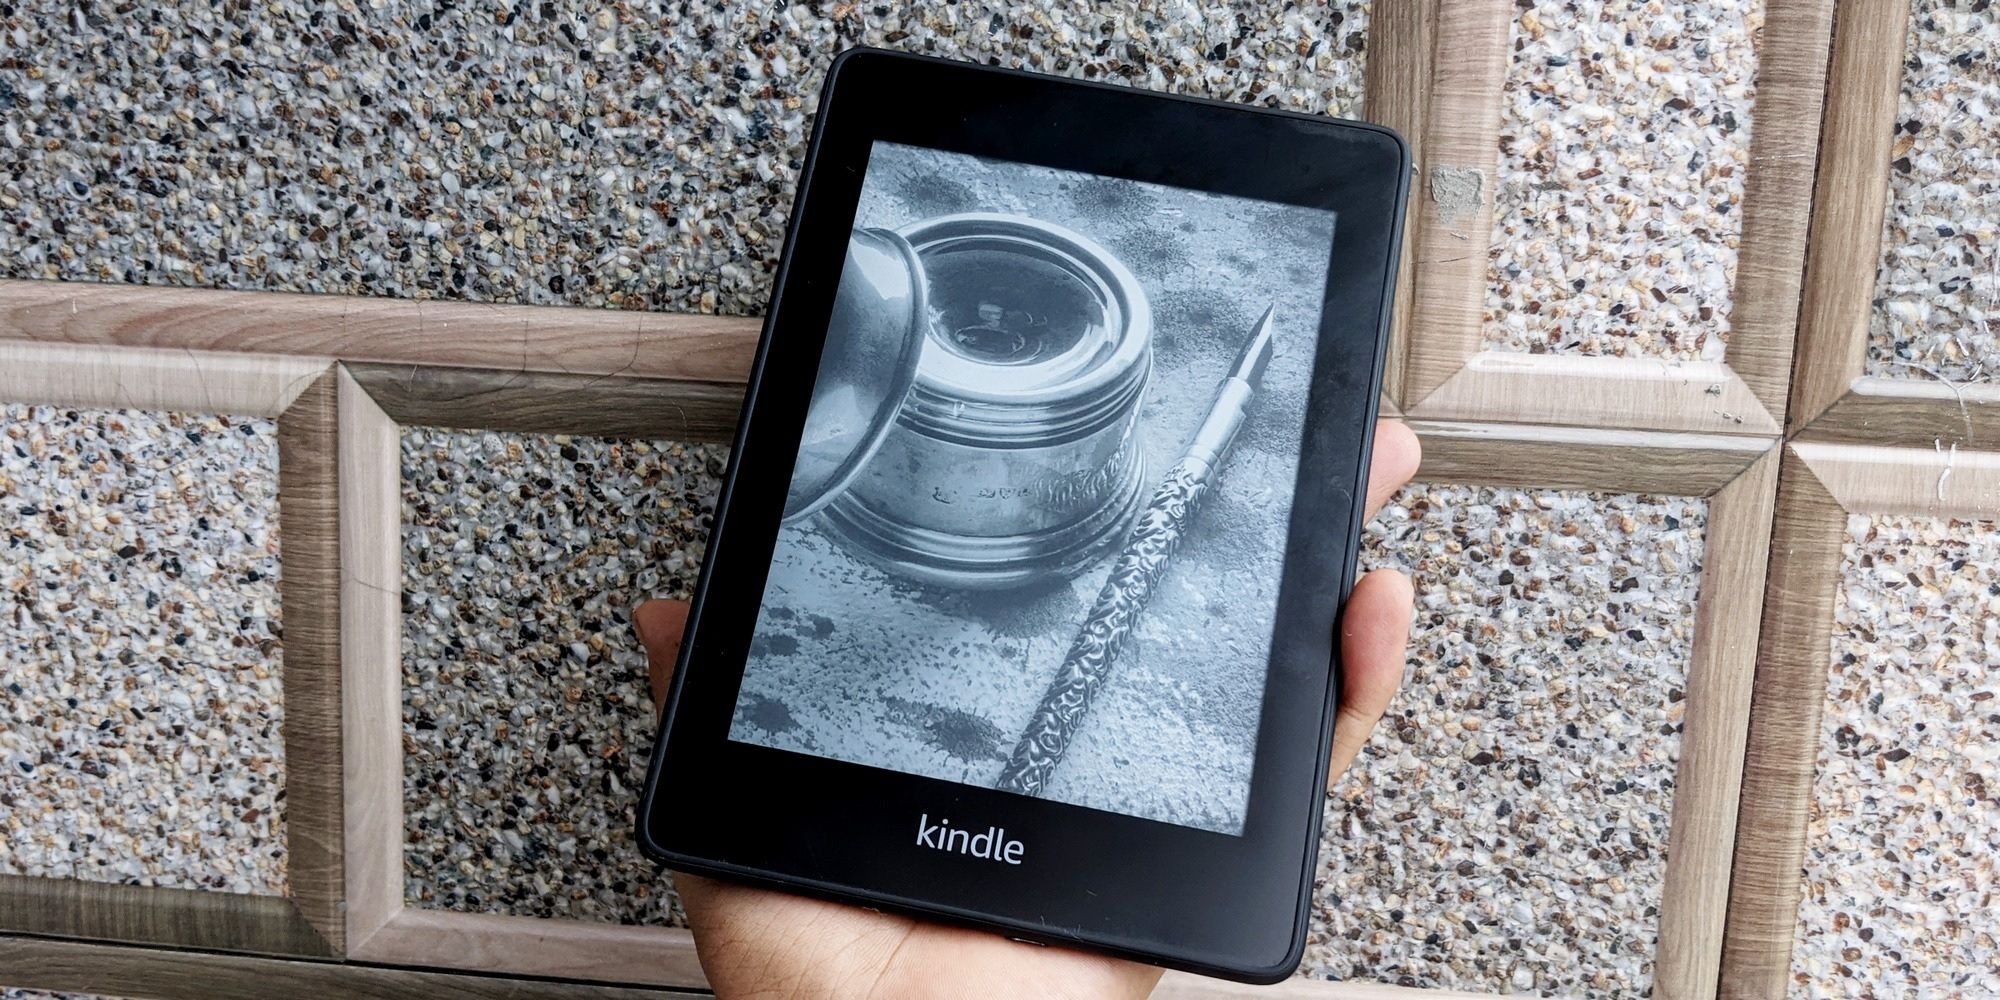 Amazon Shutting Down Internet Access For Older Kindles